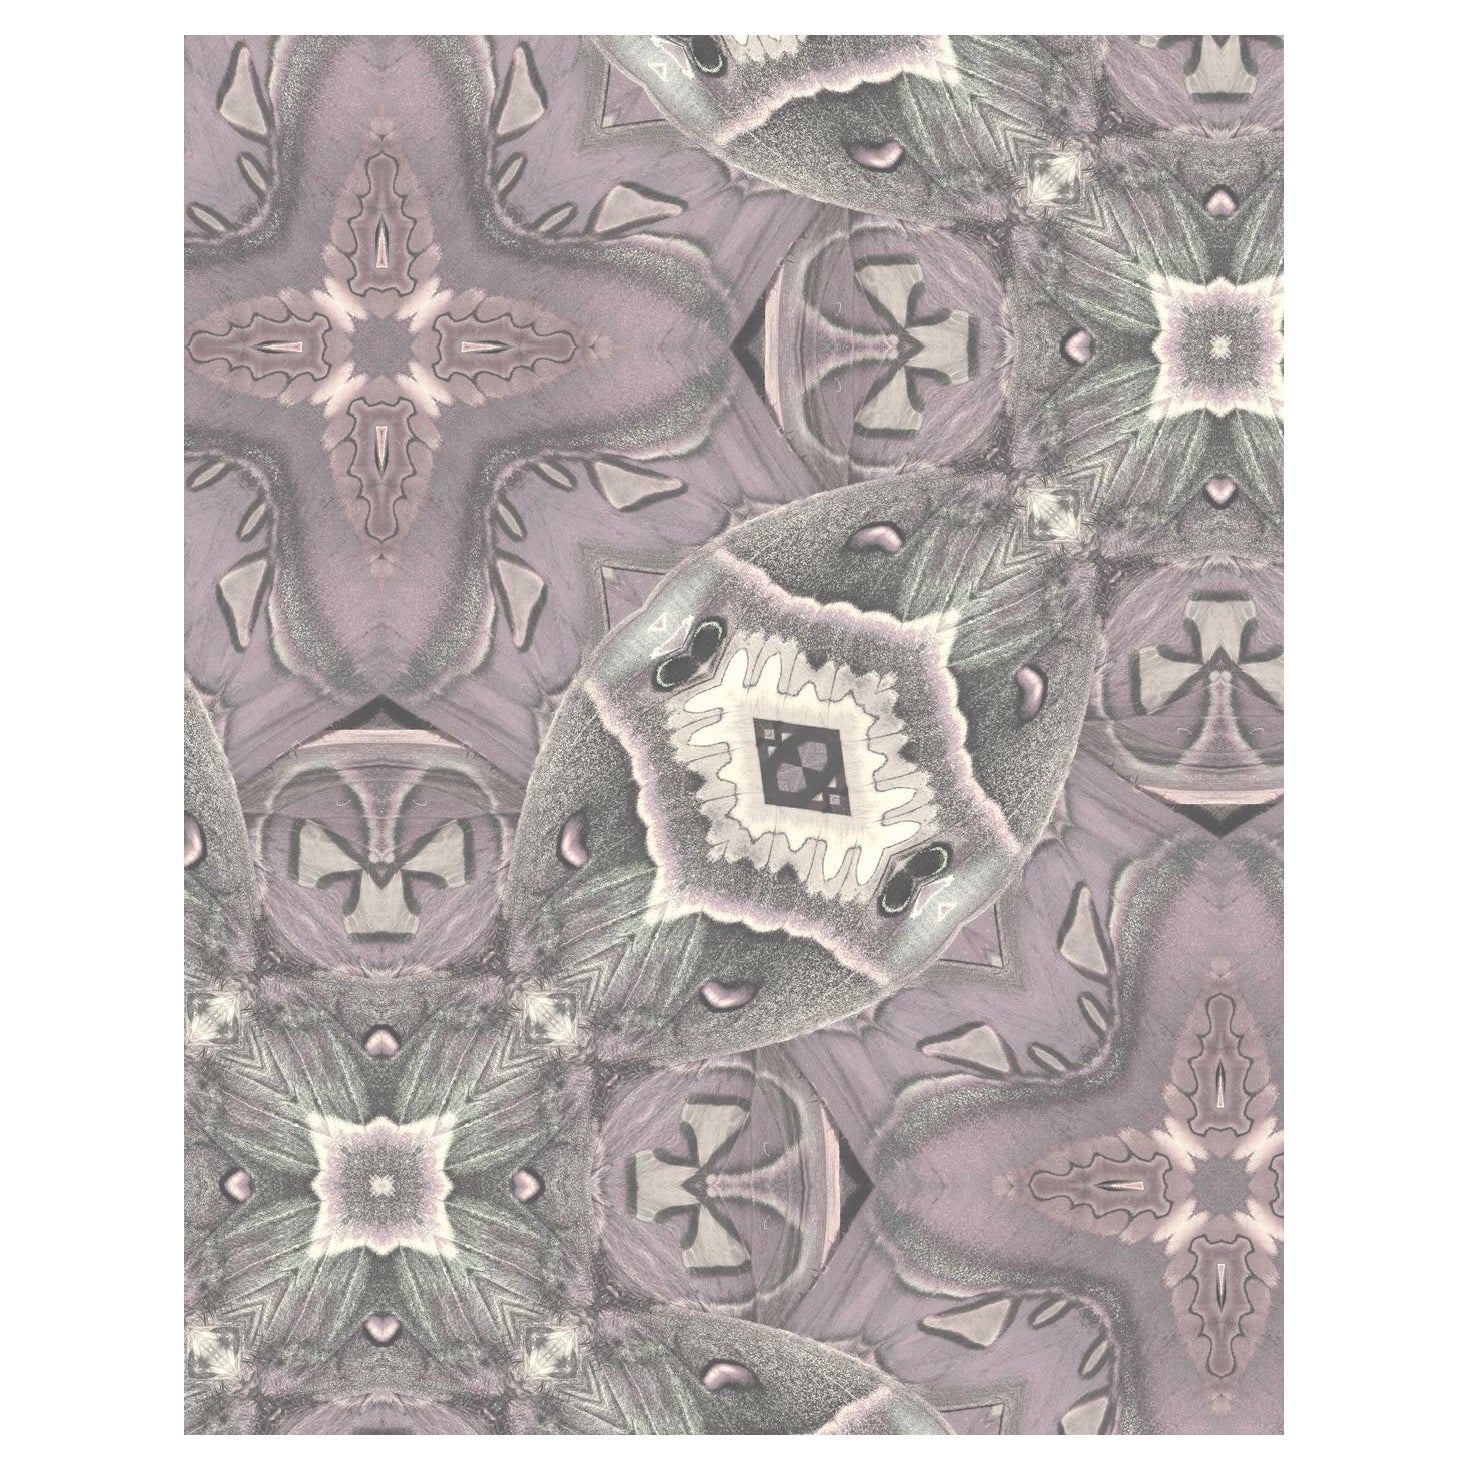  EDGE Collections Drifter Tapestry Nightsnow from our Drifter Series  For Sale